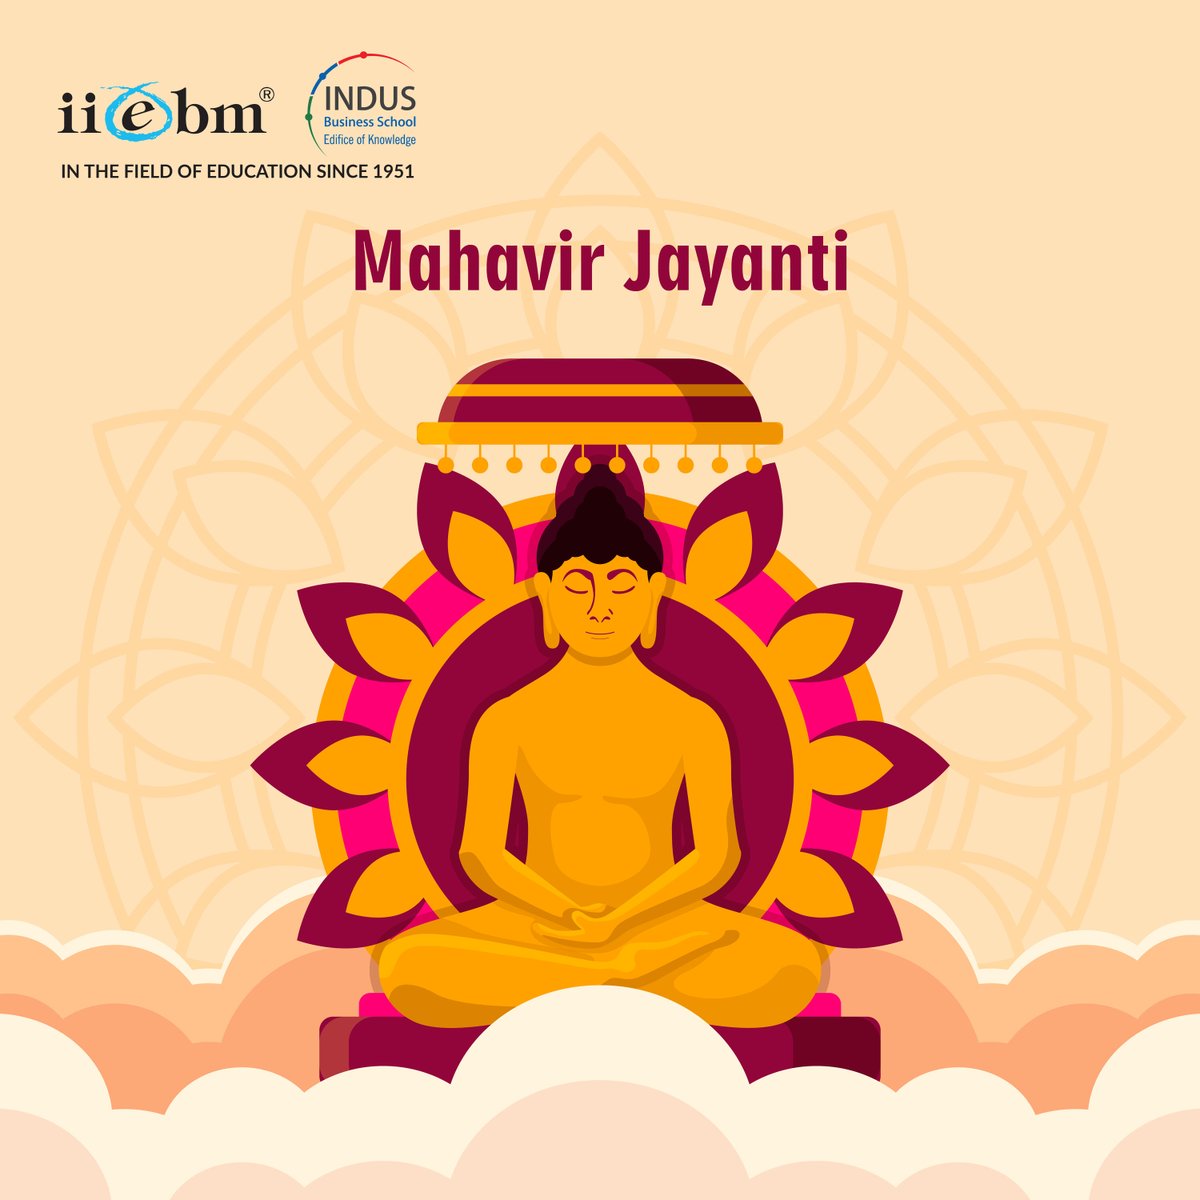 On Mahavir Jayanti, let's embrace the values of peace and knowledge. IIEBM celebrates the teachings of Lord Mahavir and his vision for a just world. Here's to learning with compassion and non-violence. 🌼🕊️
#MahavirJayanti #EducationForPeace #IIEBMValues #IIEBMPune #IIEBM